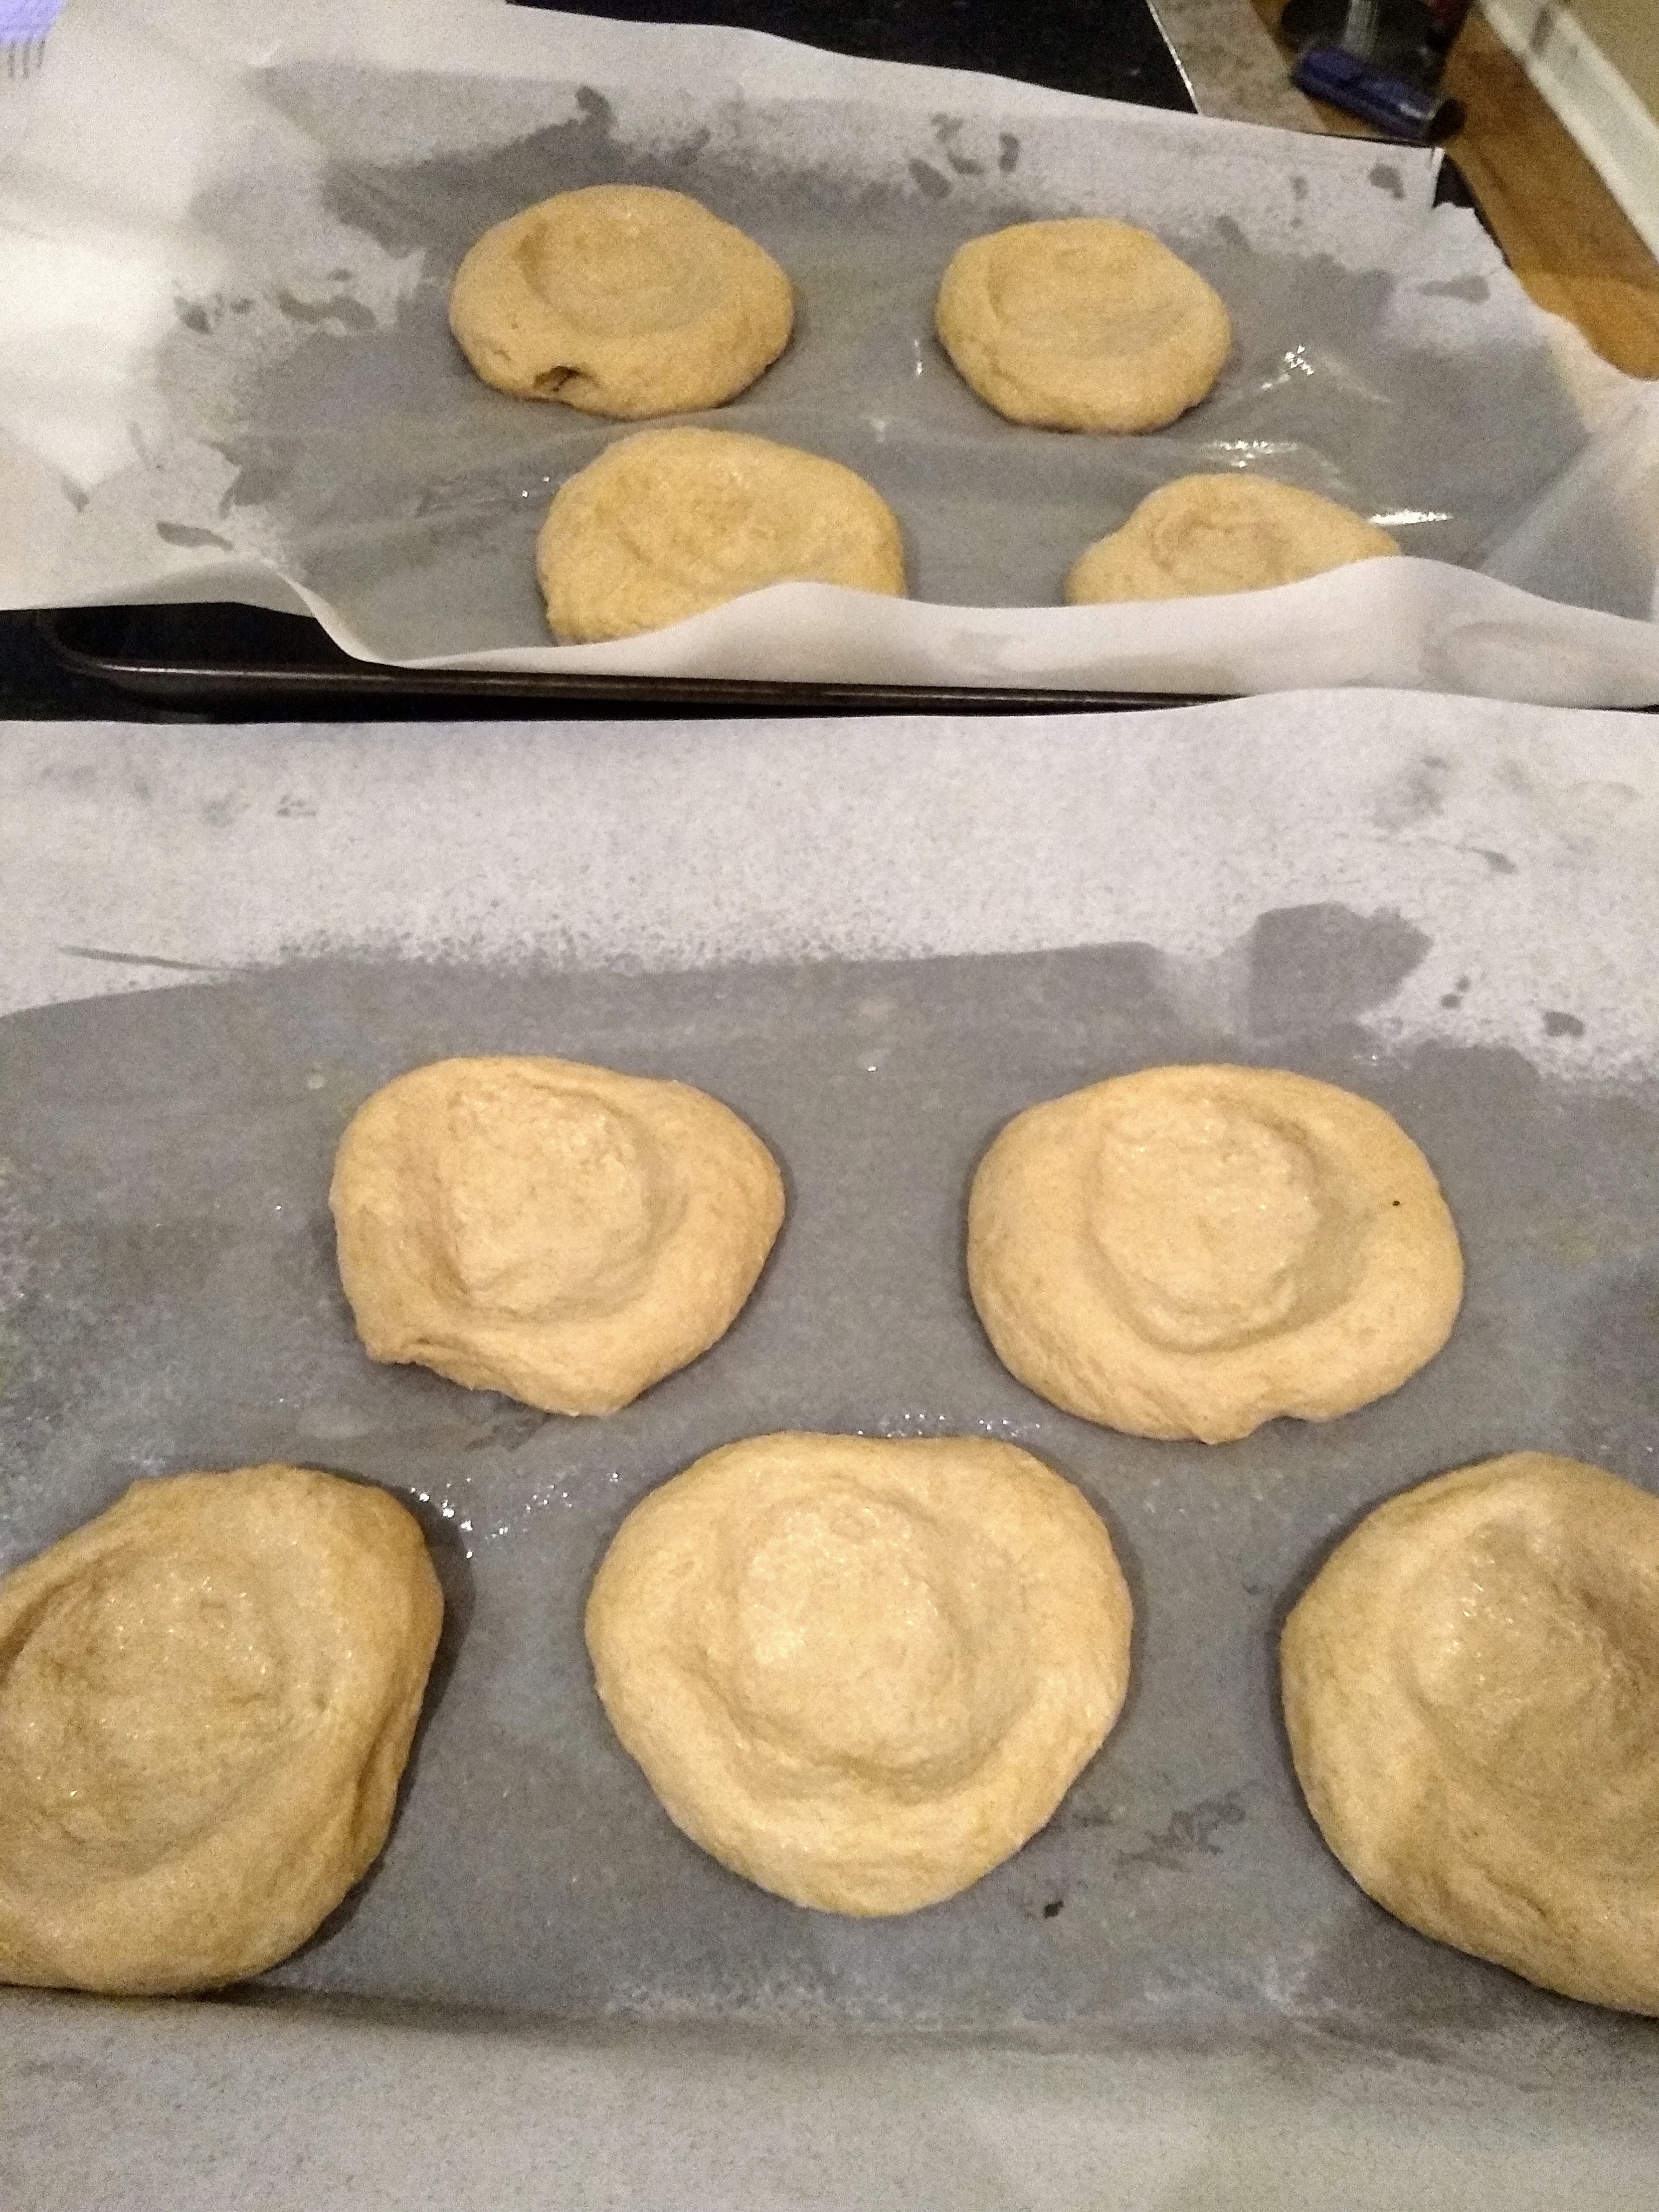 Shaped dough, flattened disks with a big indentation in the middle.